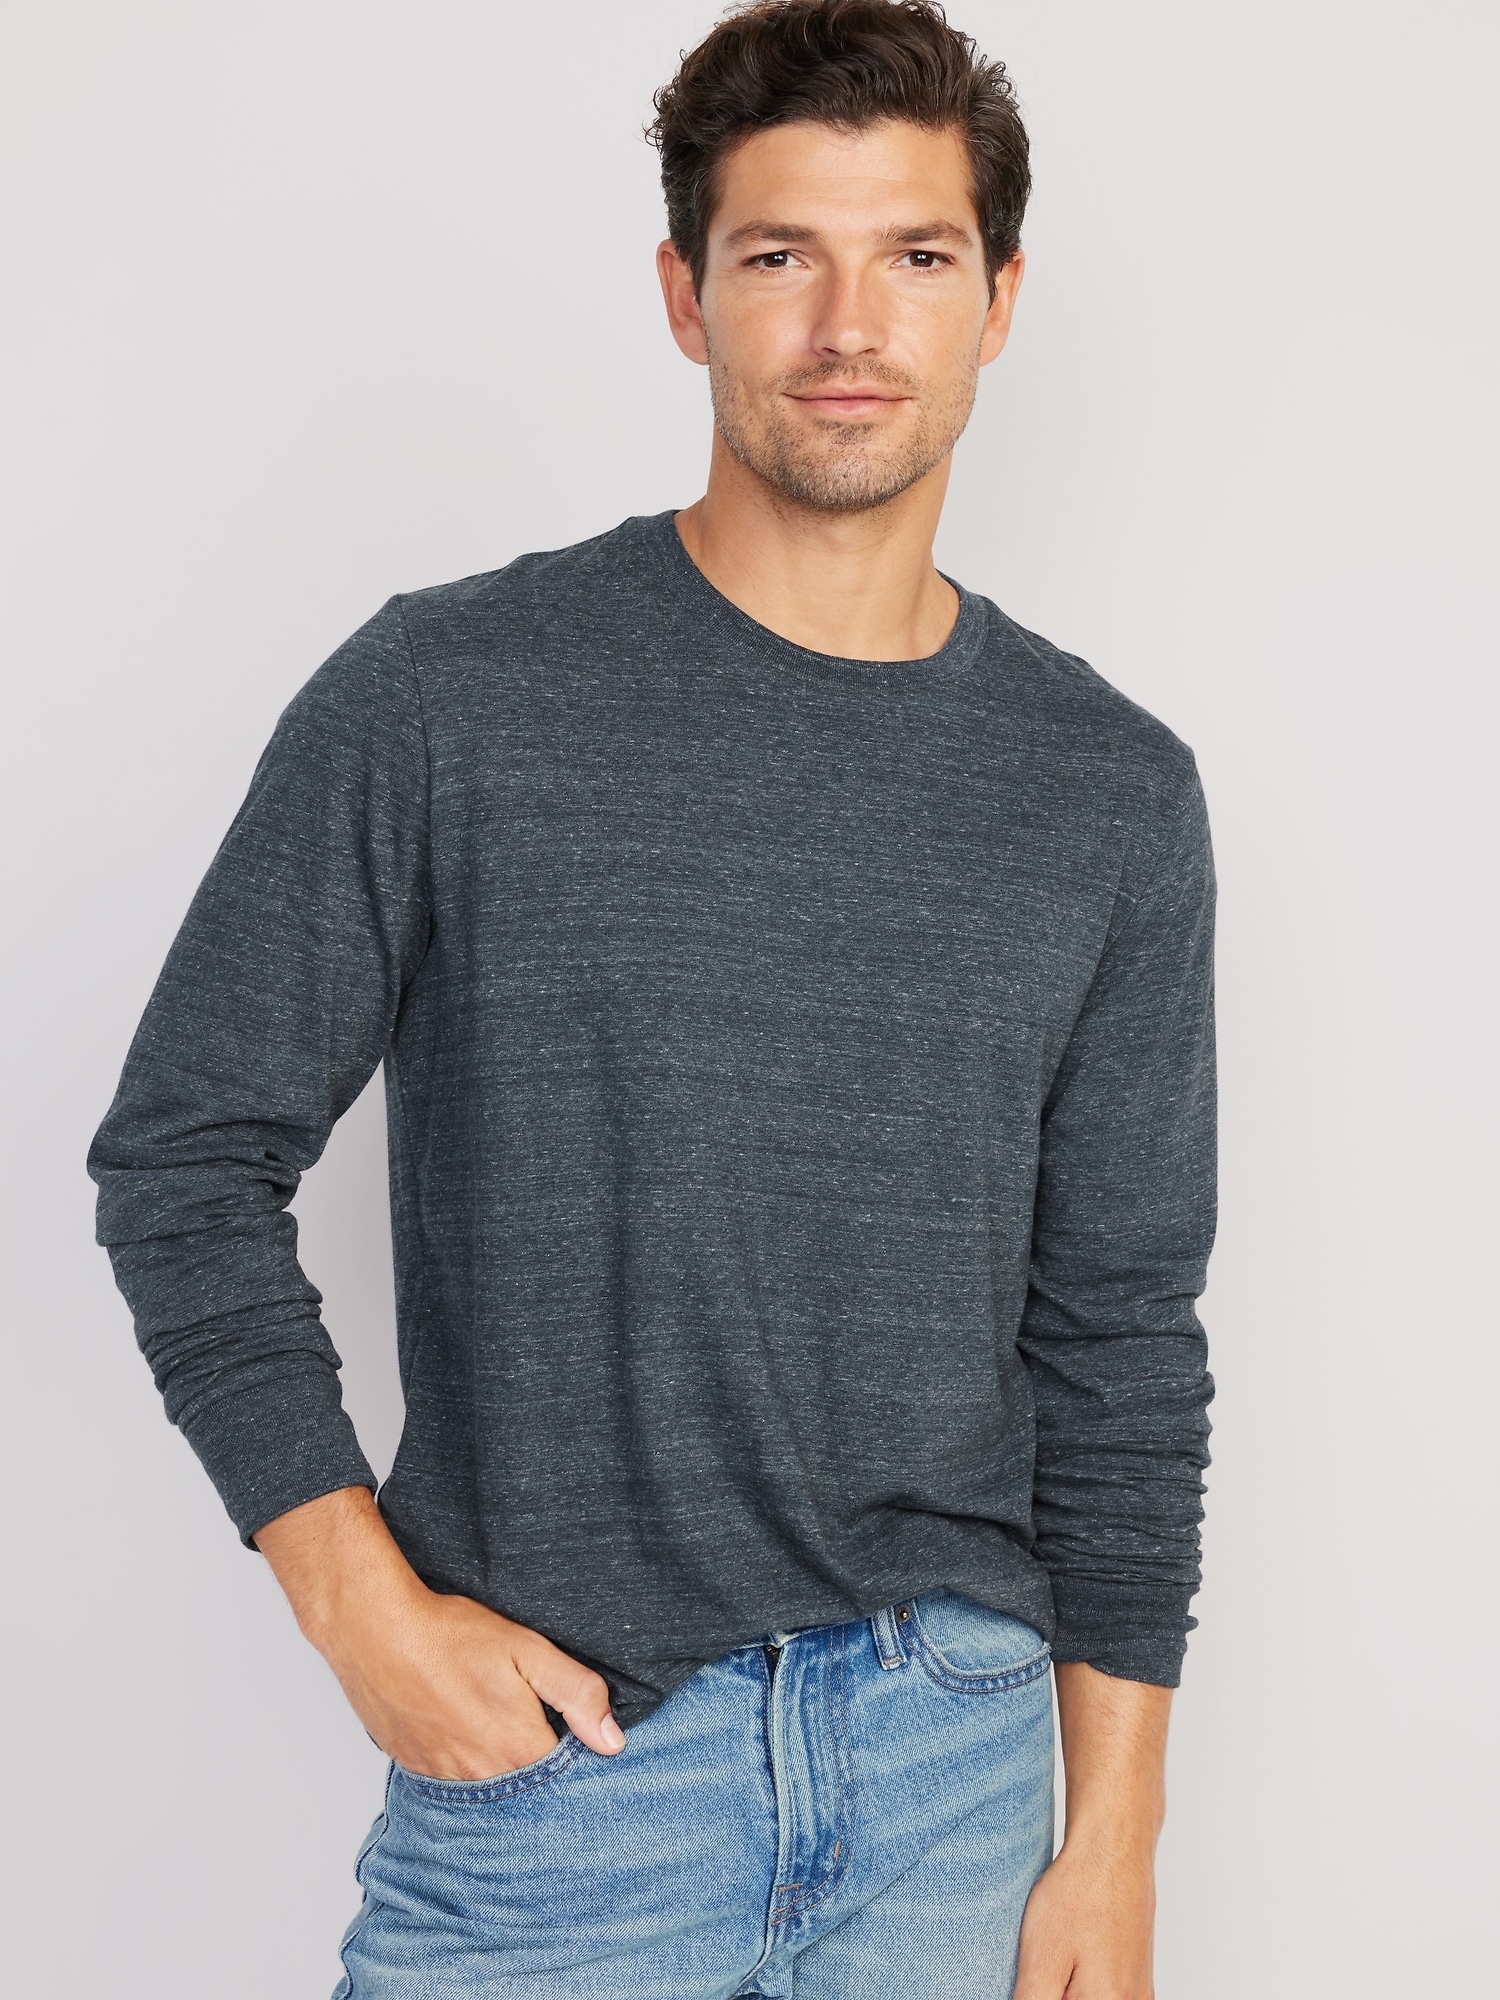 Old Navy Men's Long-Sleeve Rotation T-Shirt - - Size XS